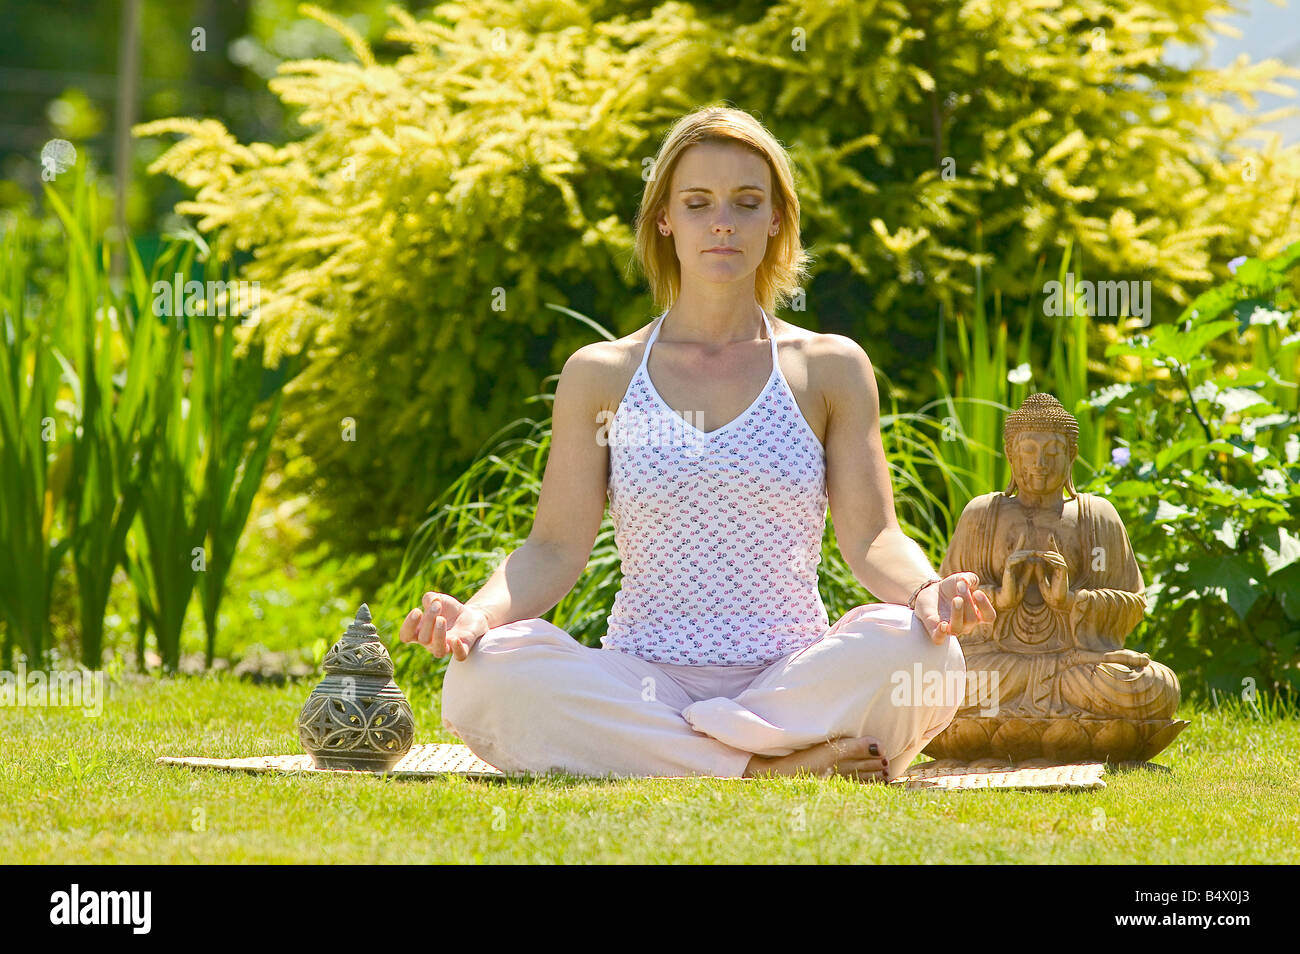 woman meditating in the garden Stock Photo